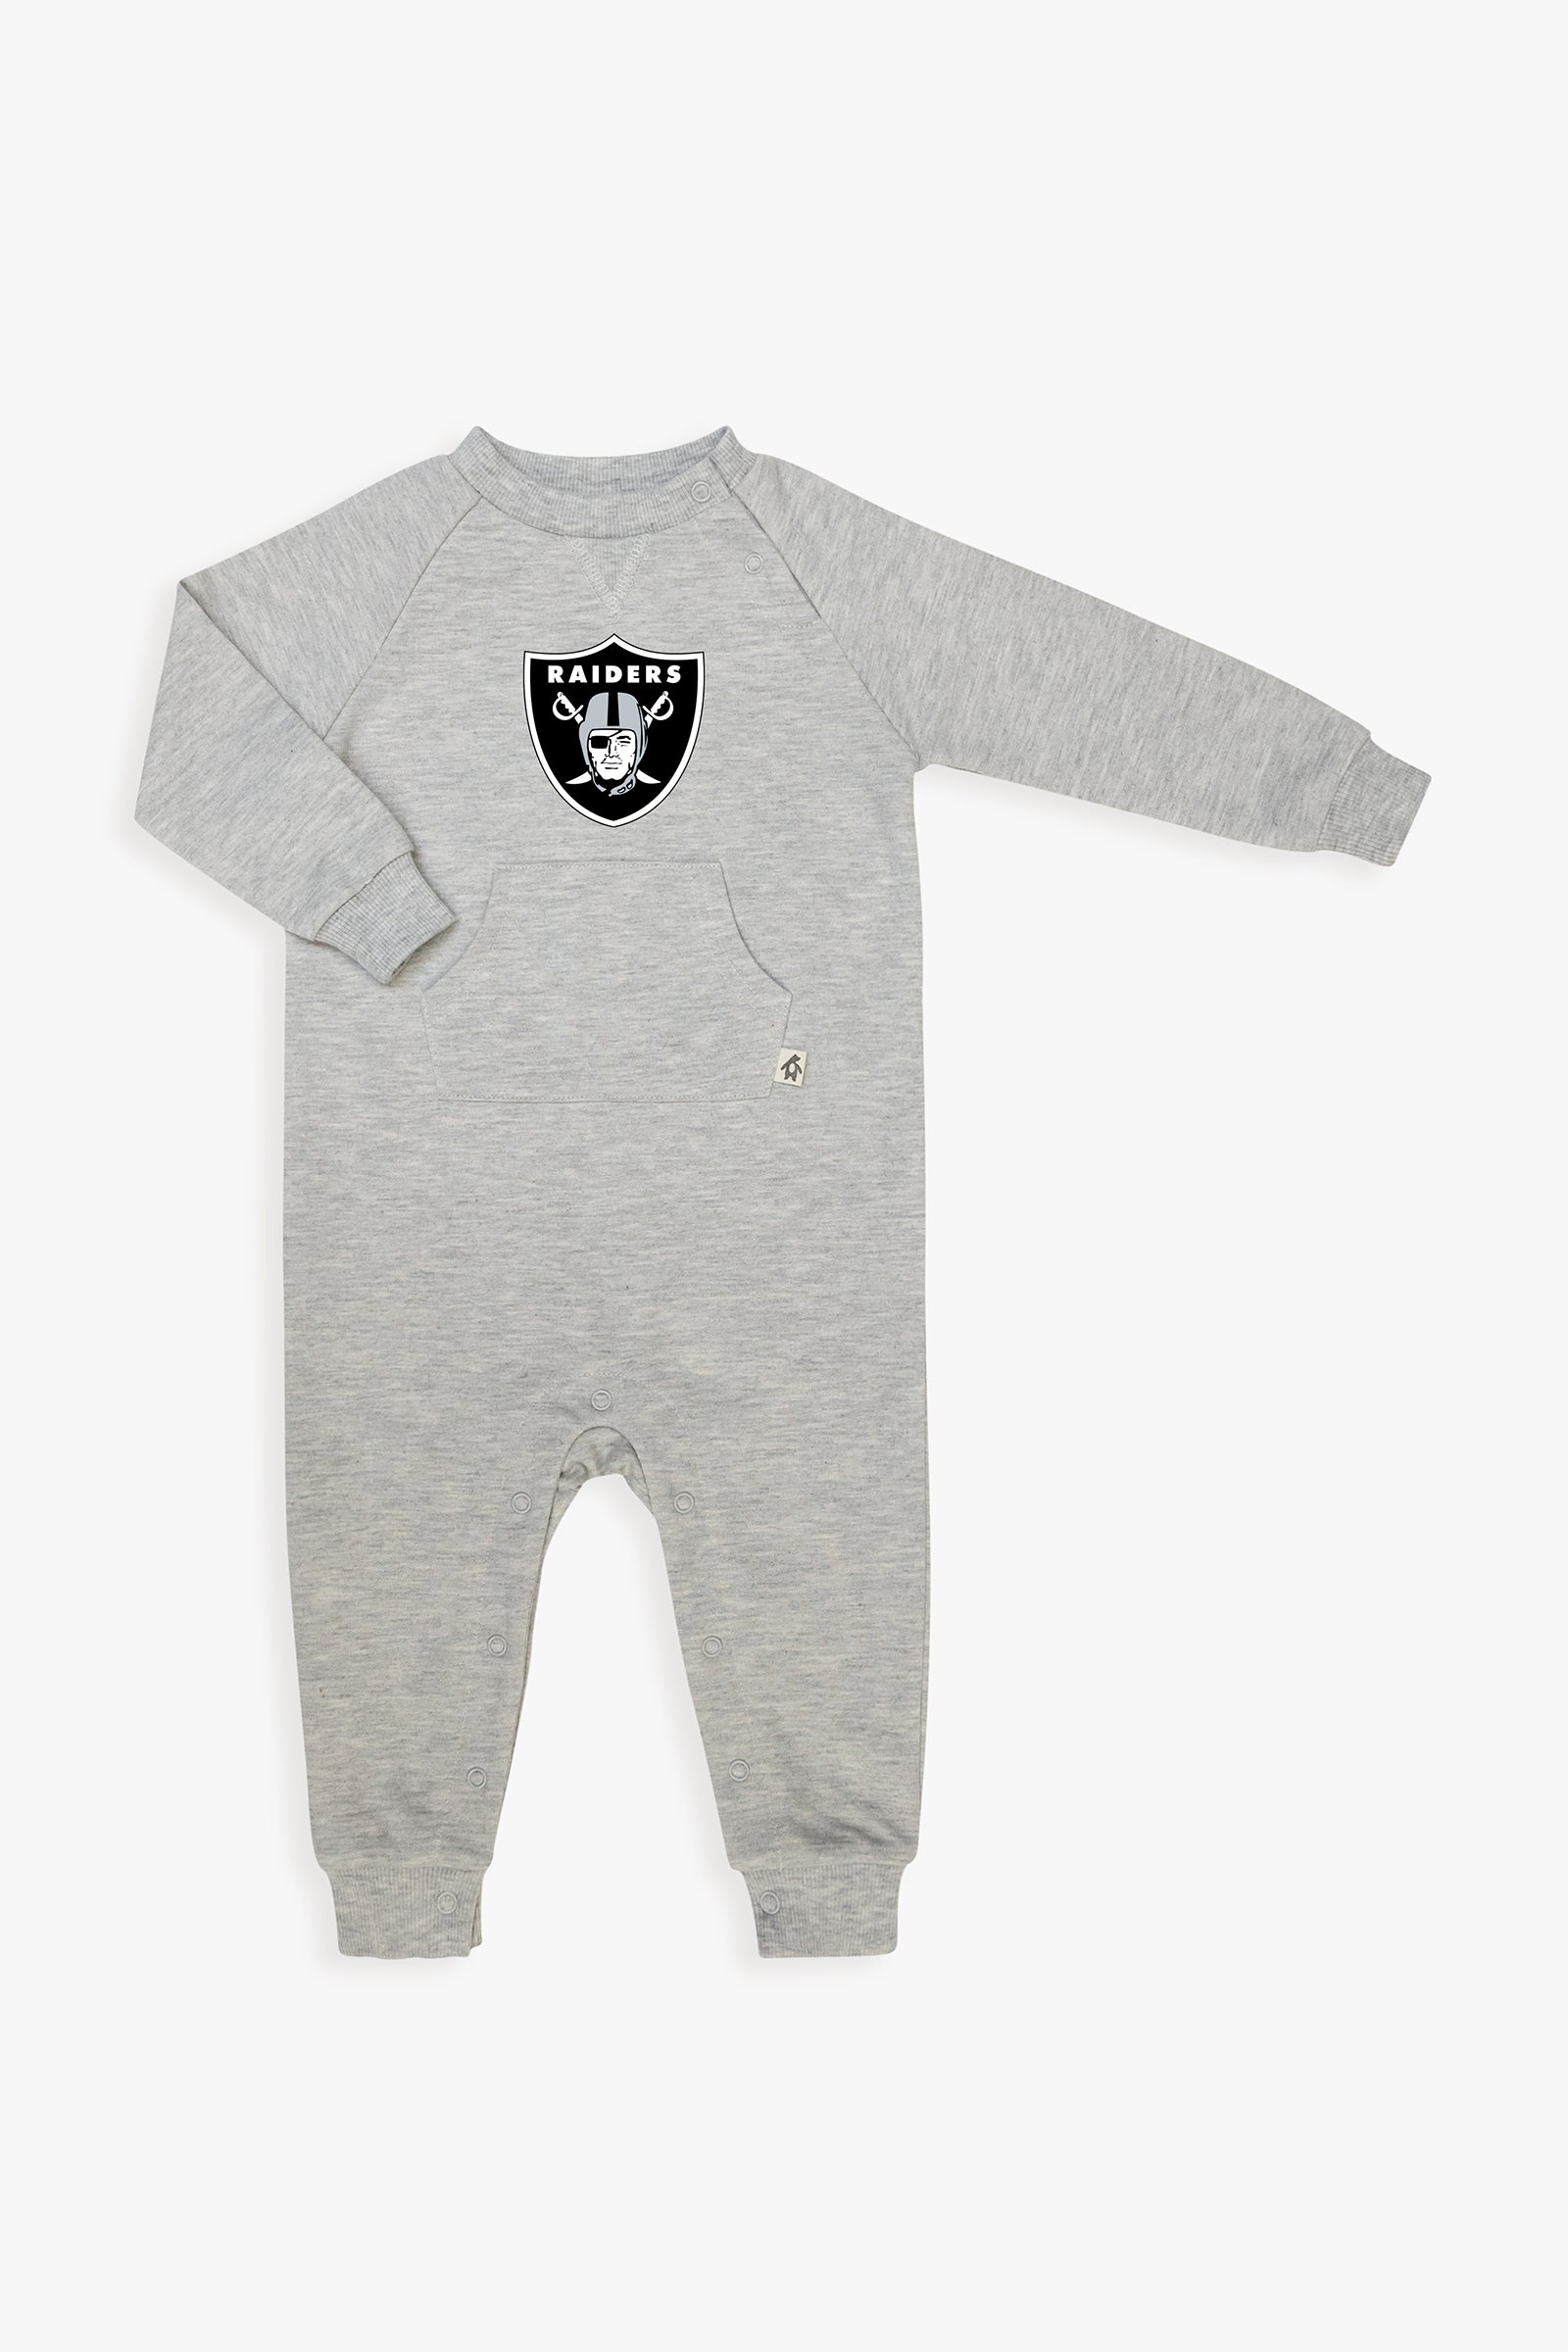 Gertex NFL Baby French Terry Jumpsuit in Grey